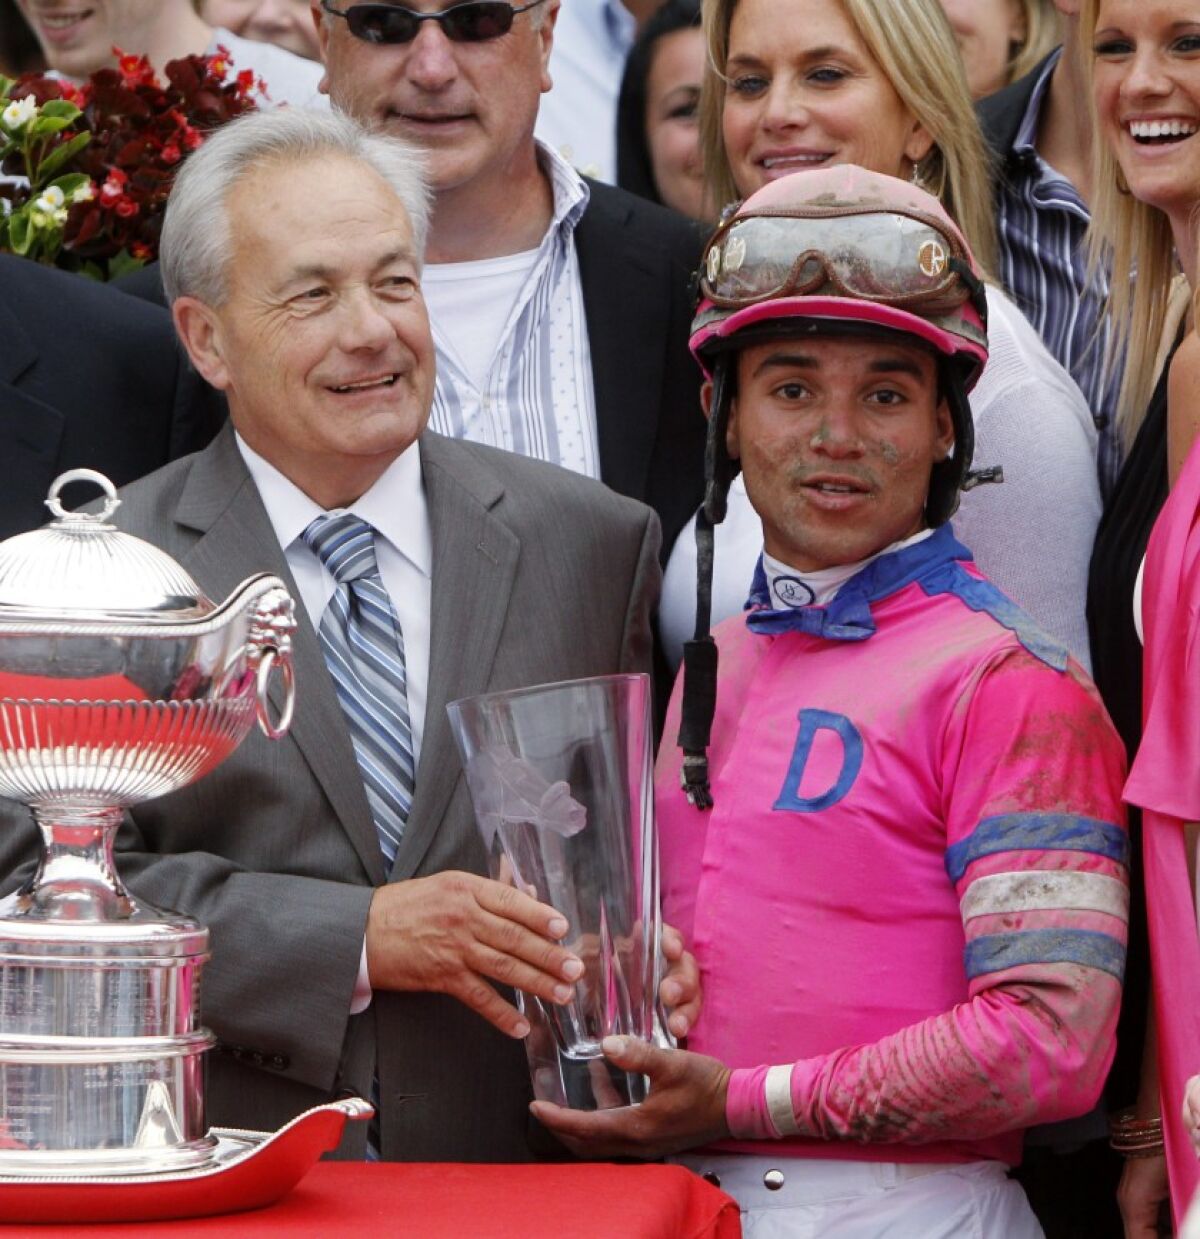 In this Aug. 21, 2010, file photo, Jockey Joel Rosario, right, and trainer Jerry Hollendorfer pose with trophies after Rosario rode Blind Luck to a win in the Alabama Stakes horse race at Saratoga Race Course in Saratoga Springs, N.Y.